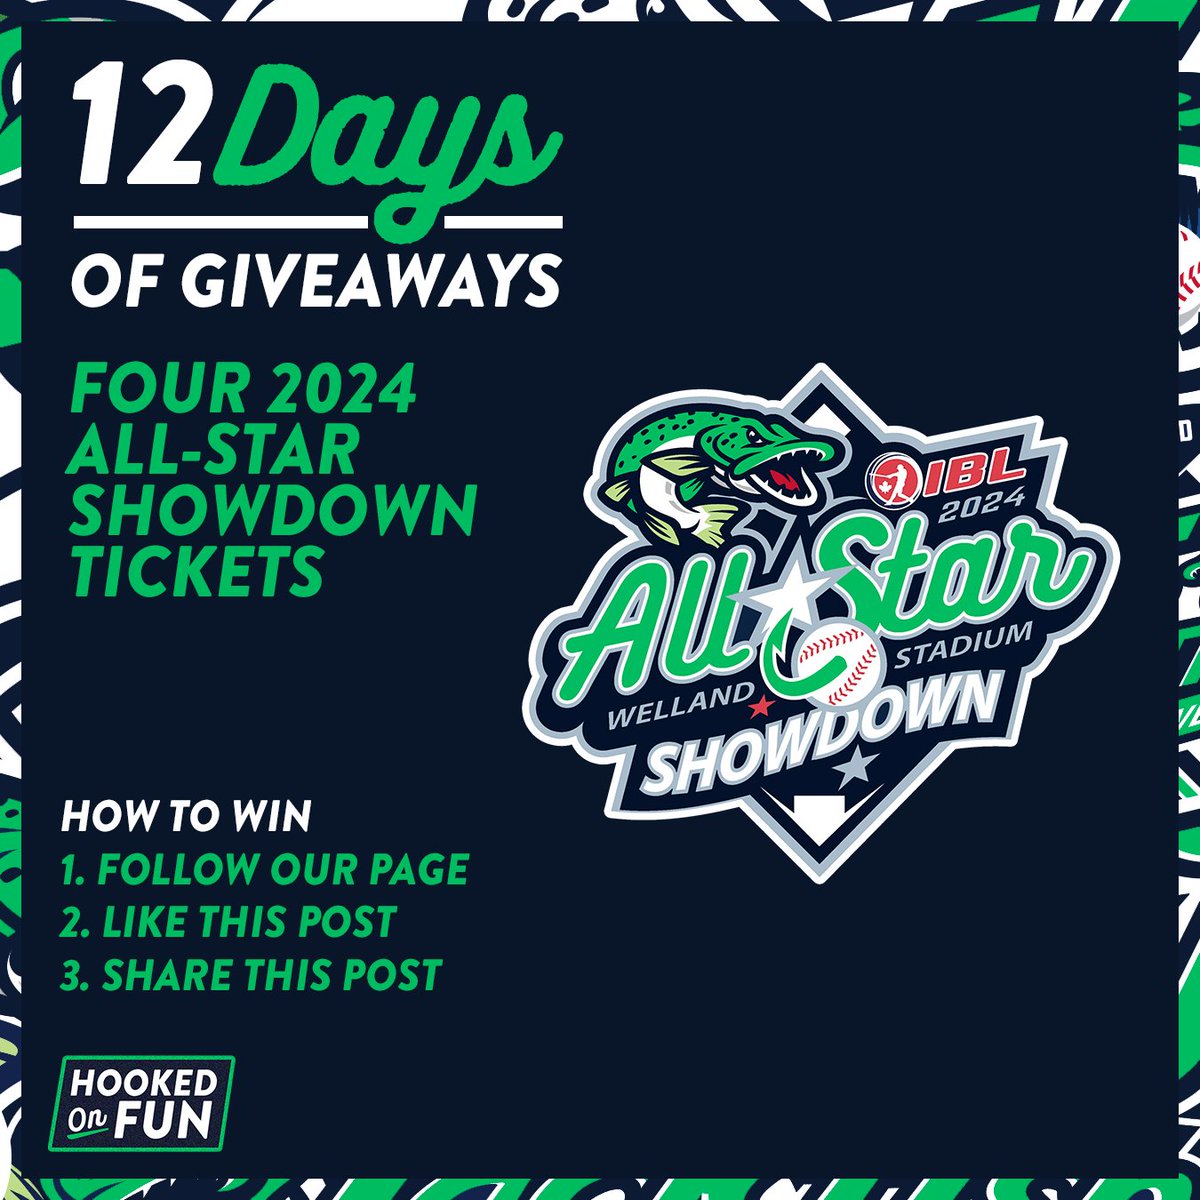 Hey now, you're an All-Star, win some tickets, hey! Win four tickets to the 2024 All-Star Showdown on July 20th, 2024 at The Pond! 1. Follow us 2. Like this post 3. Share this post Winner to be announced at 4pm